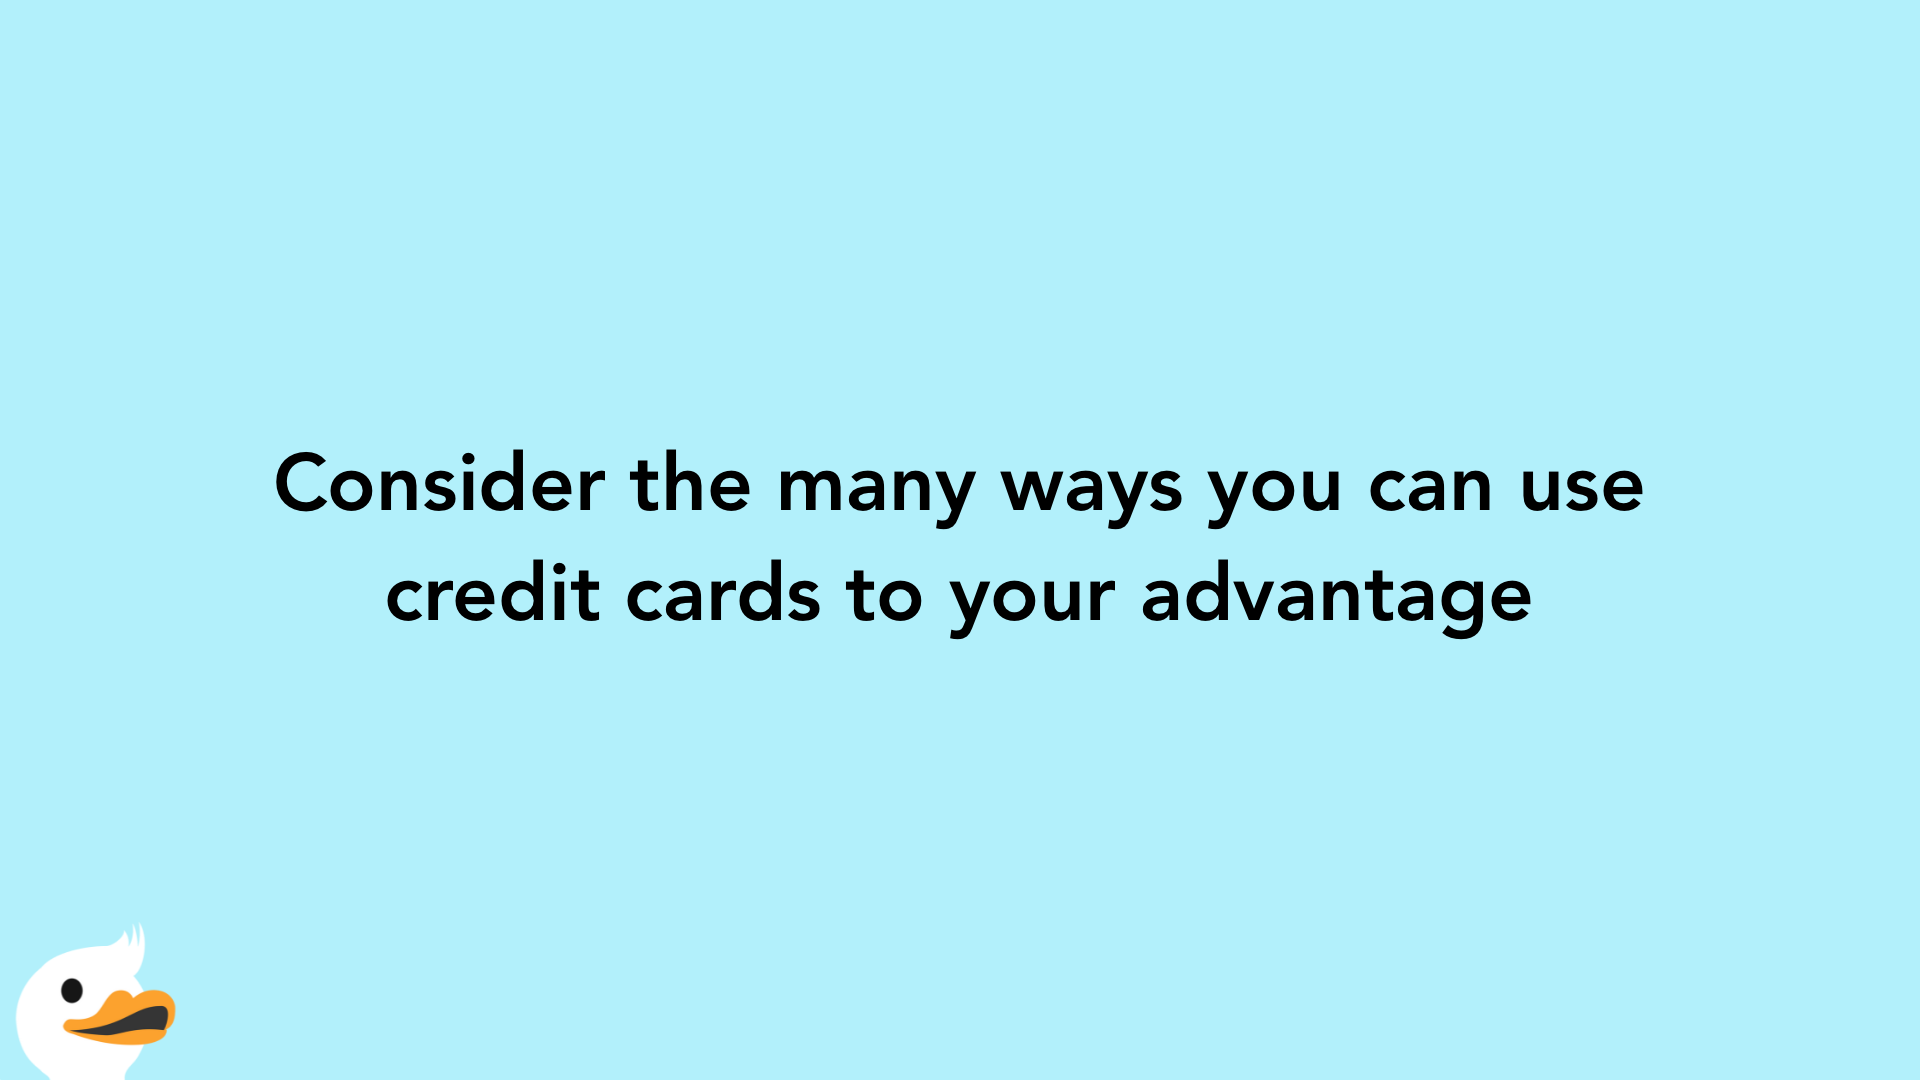 Consider the many ways you can use credit cards to your advantage